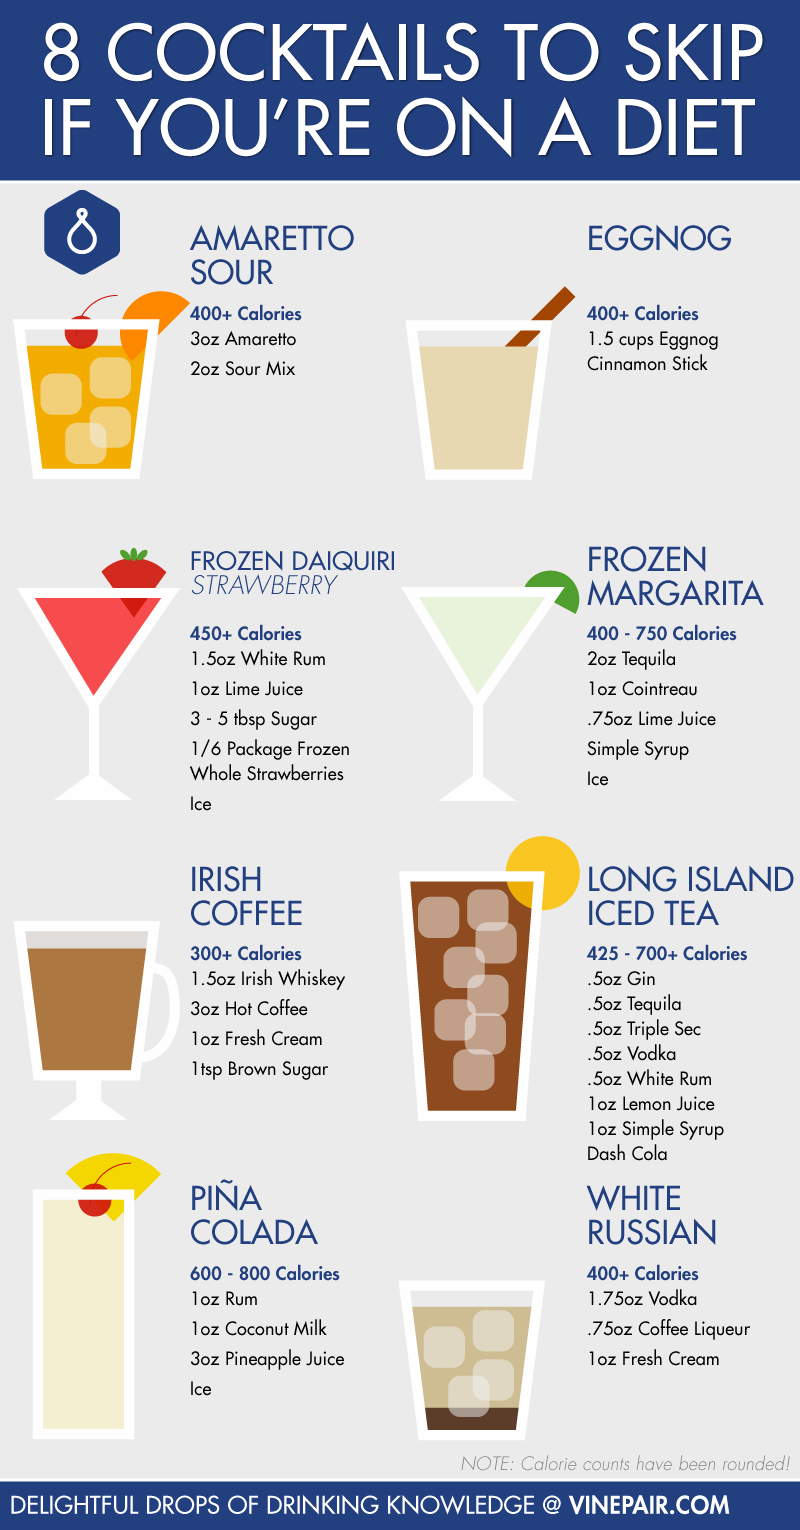 8 Cocktails To Skip If You're On A Diet